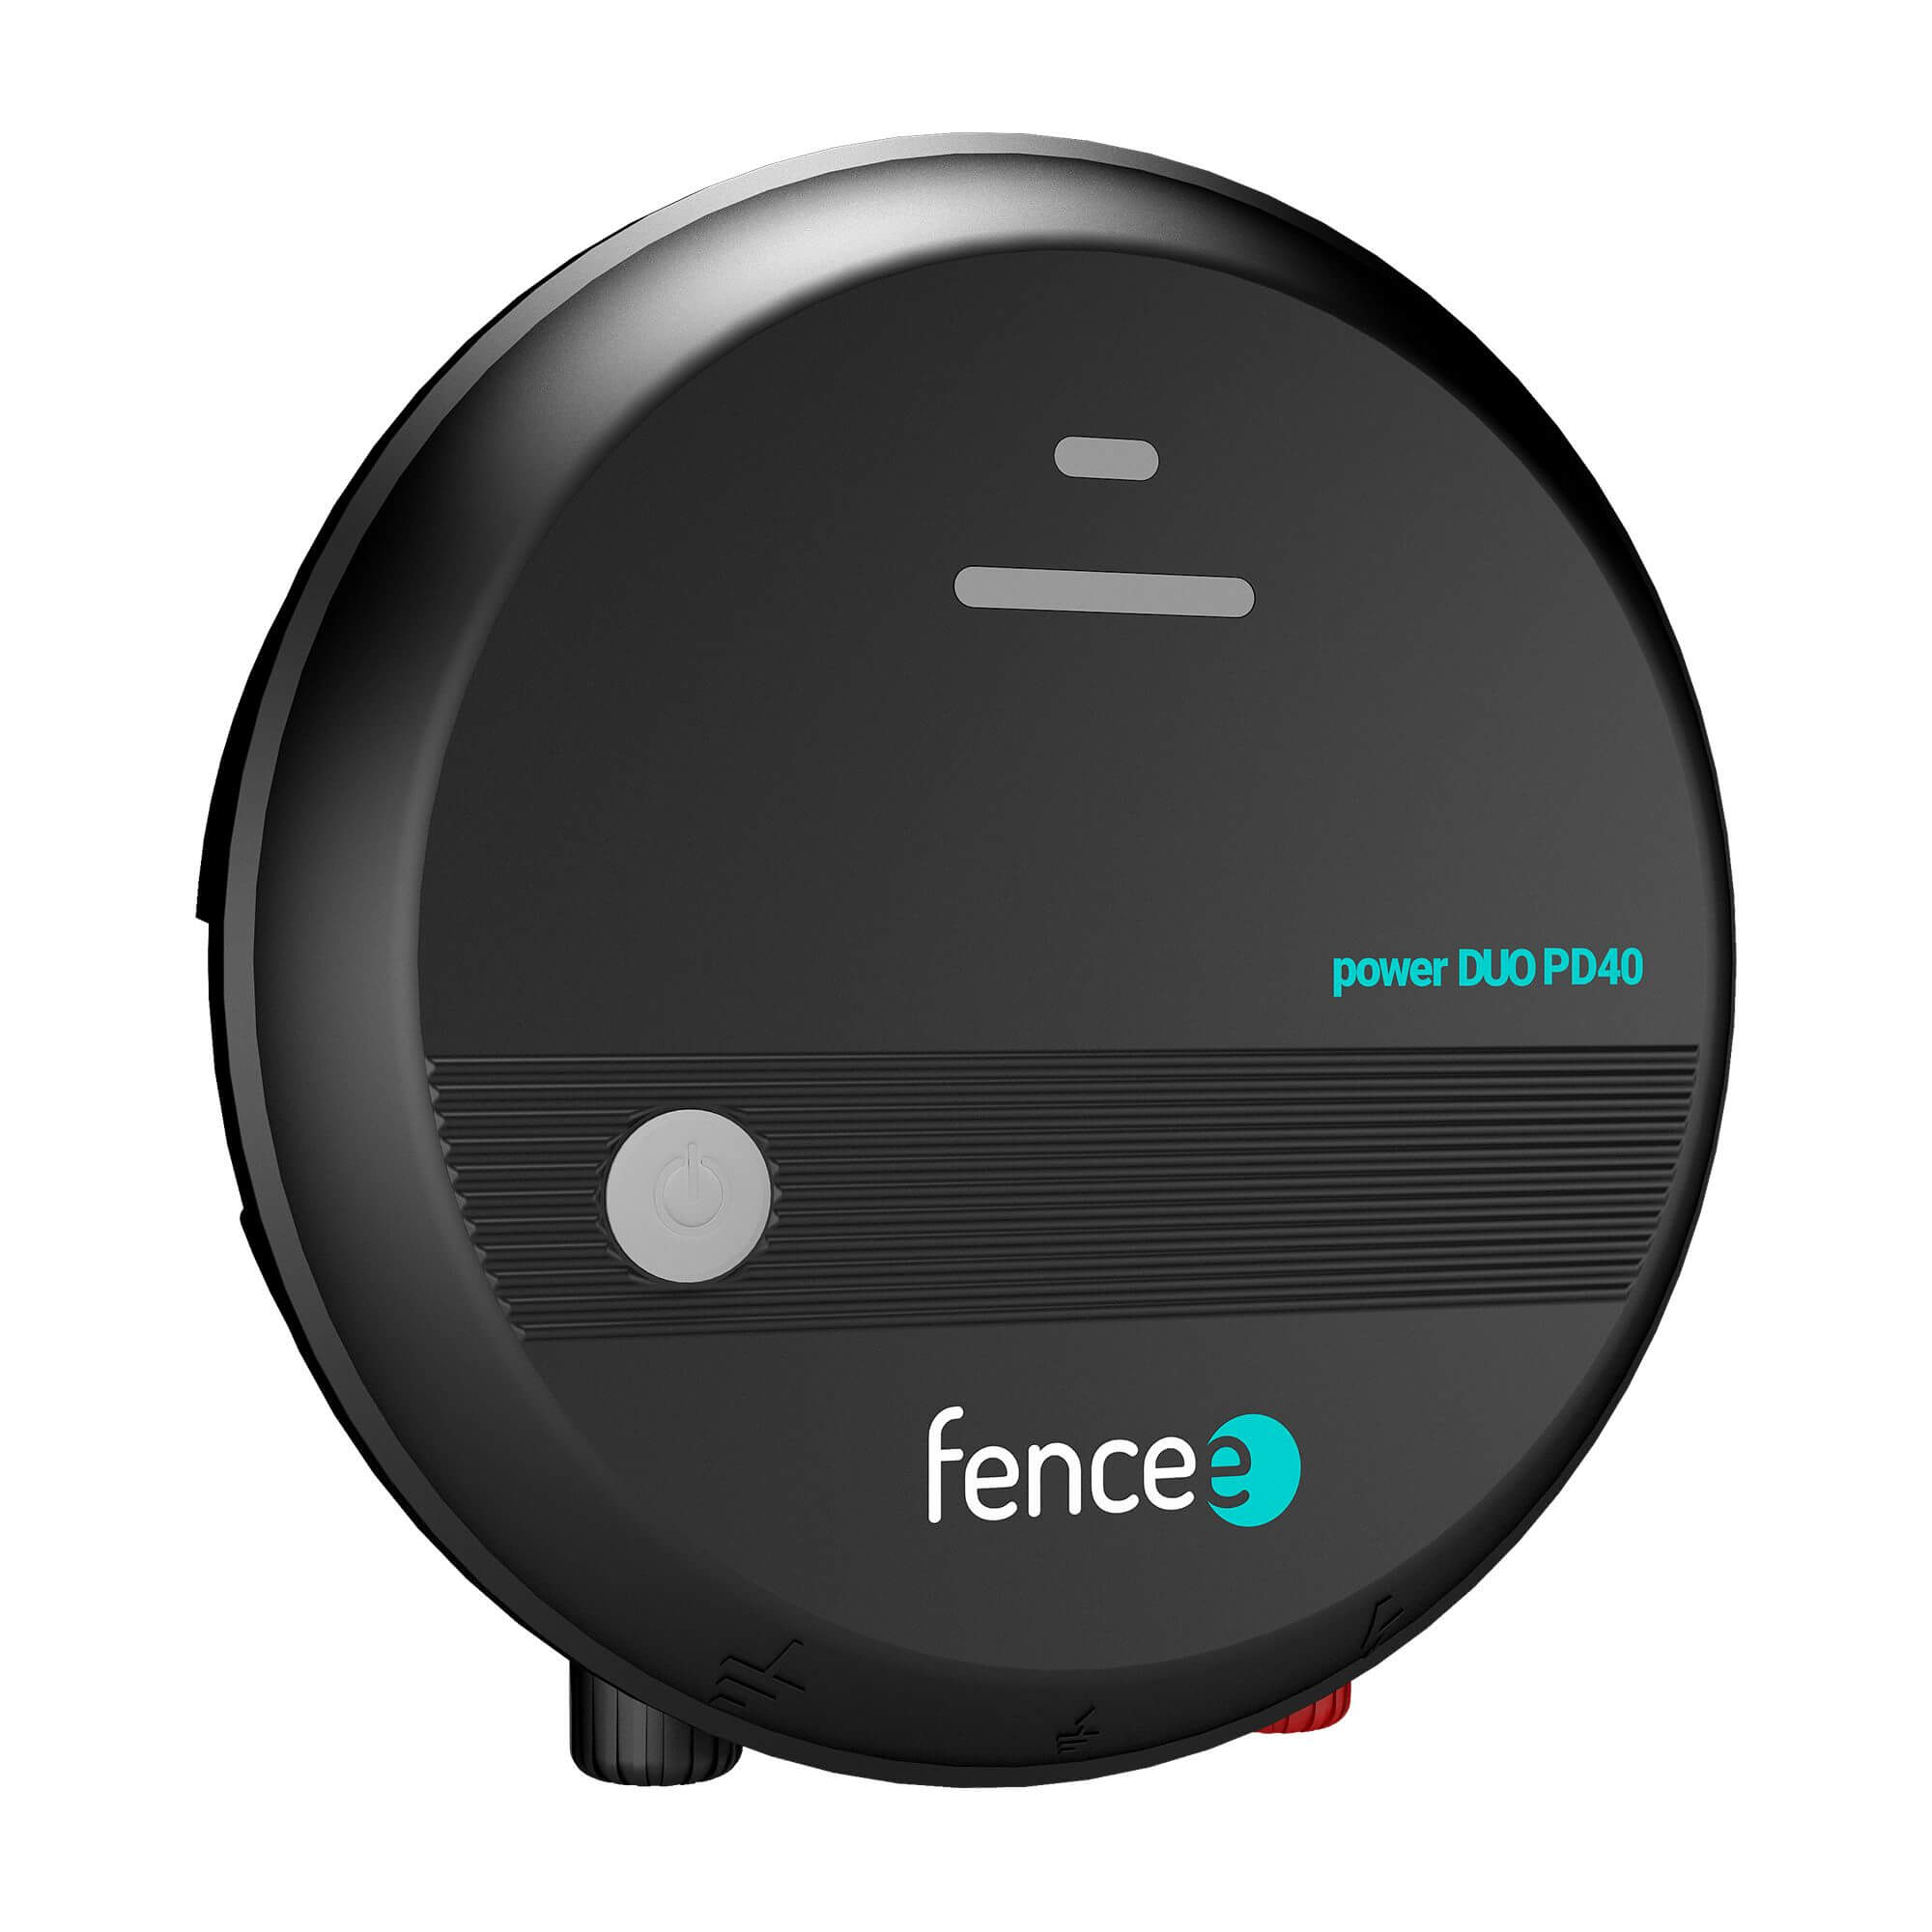 Fencee20power20DUO20PD40